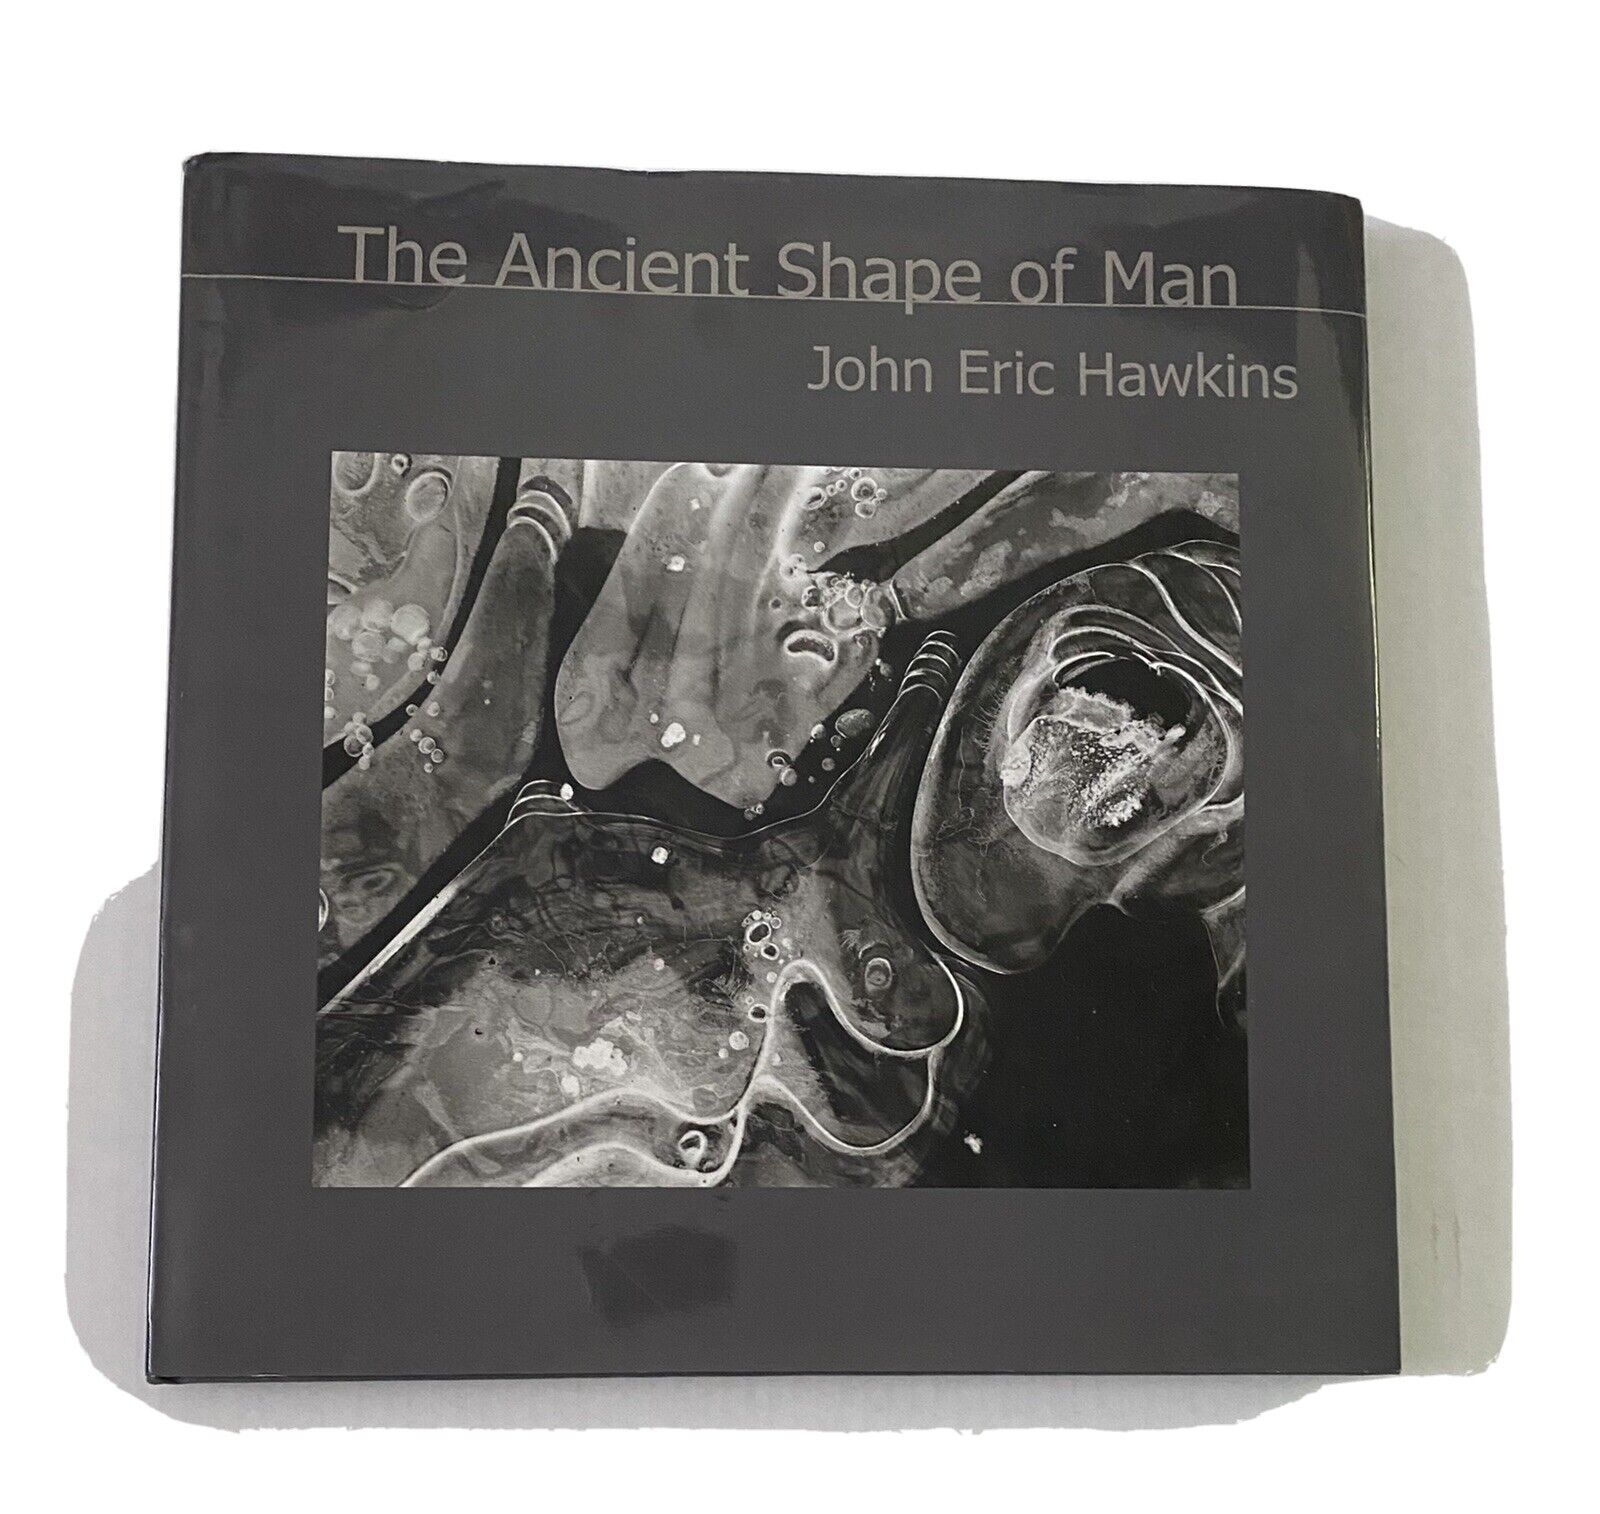 The Ancient Shape of Man